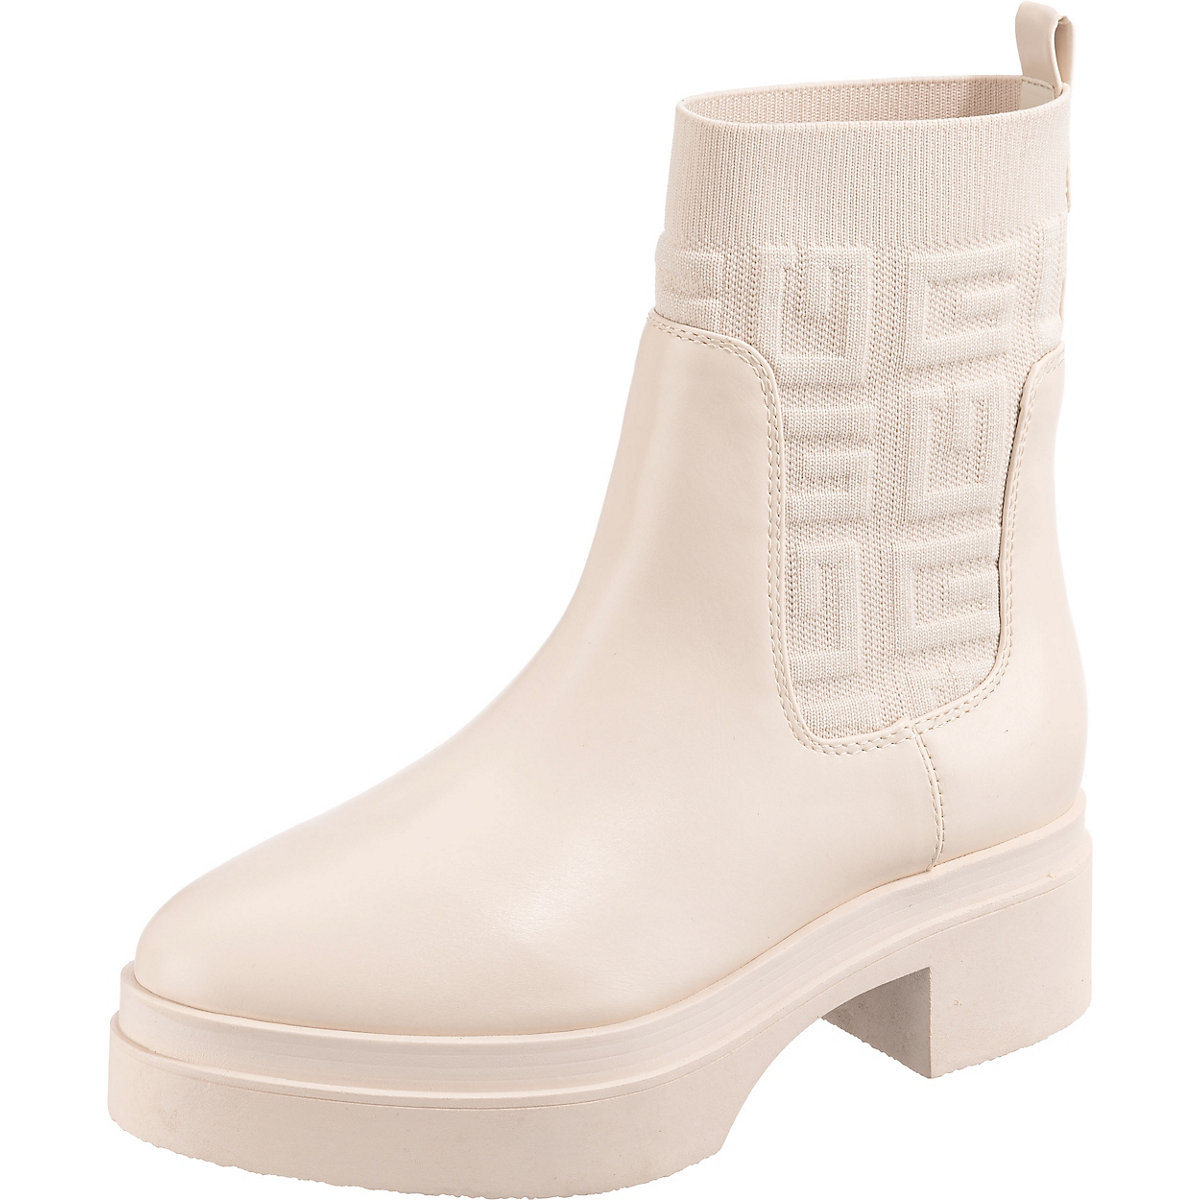 GUESS Keanna Chelsea Boots creme